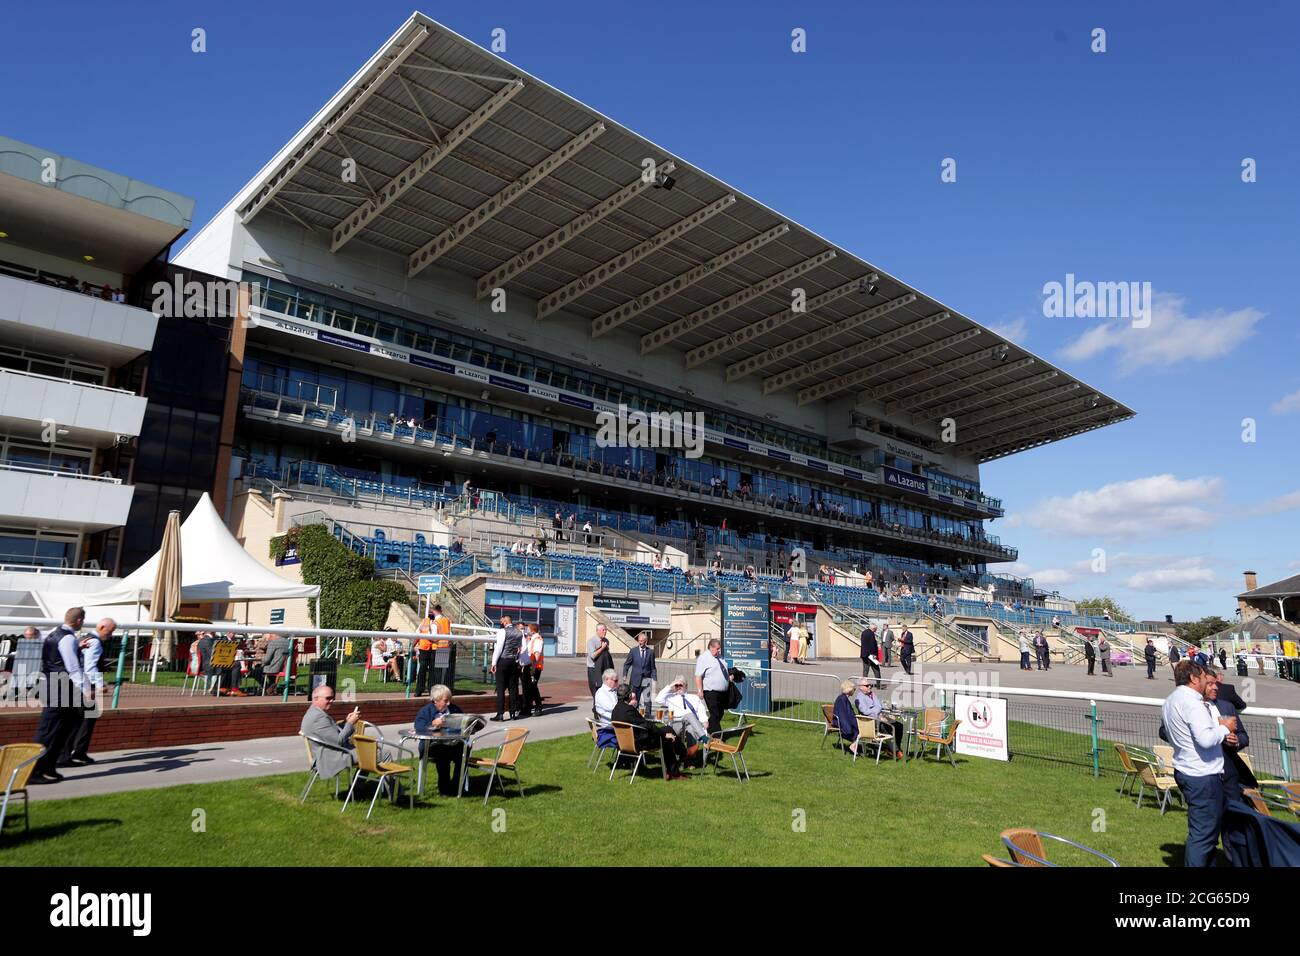 Racegoers next to the course and in the stands as a pilot scheme for the return of crowds to sporting events is expected to bring in 2500 spectators during day one of the William Hill St Leger Festival at Doncaster Racecourse. Stock Photo